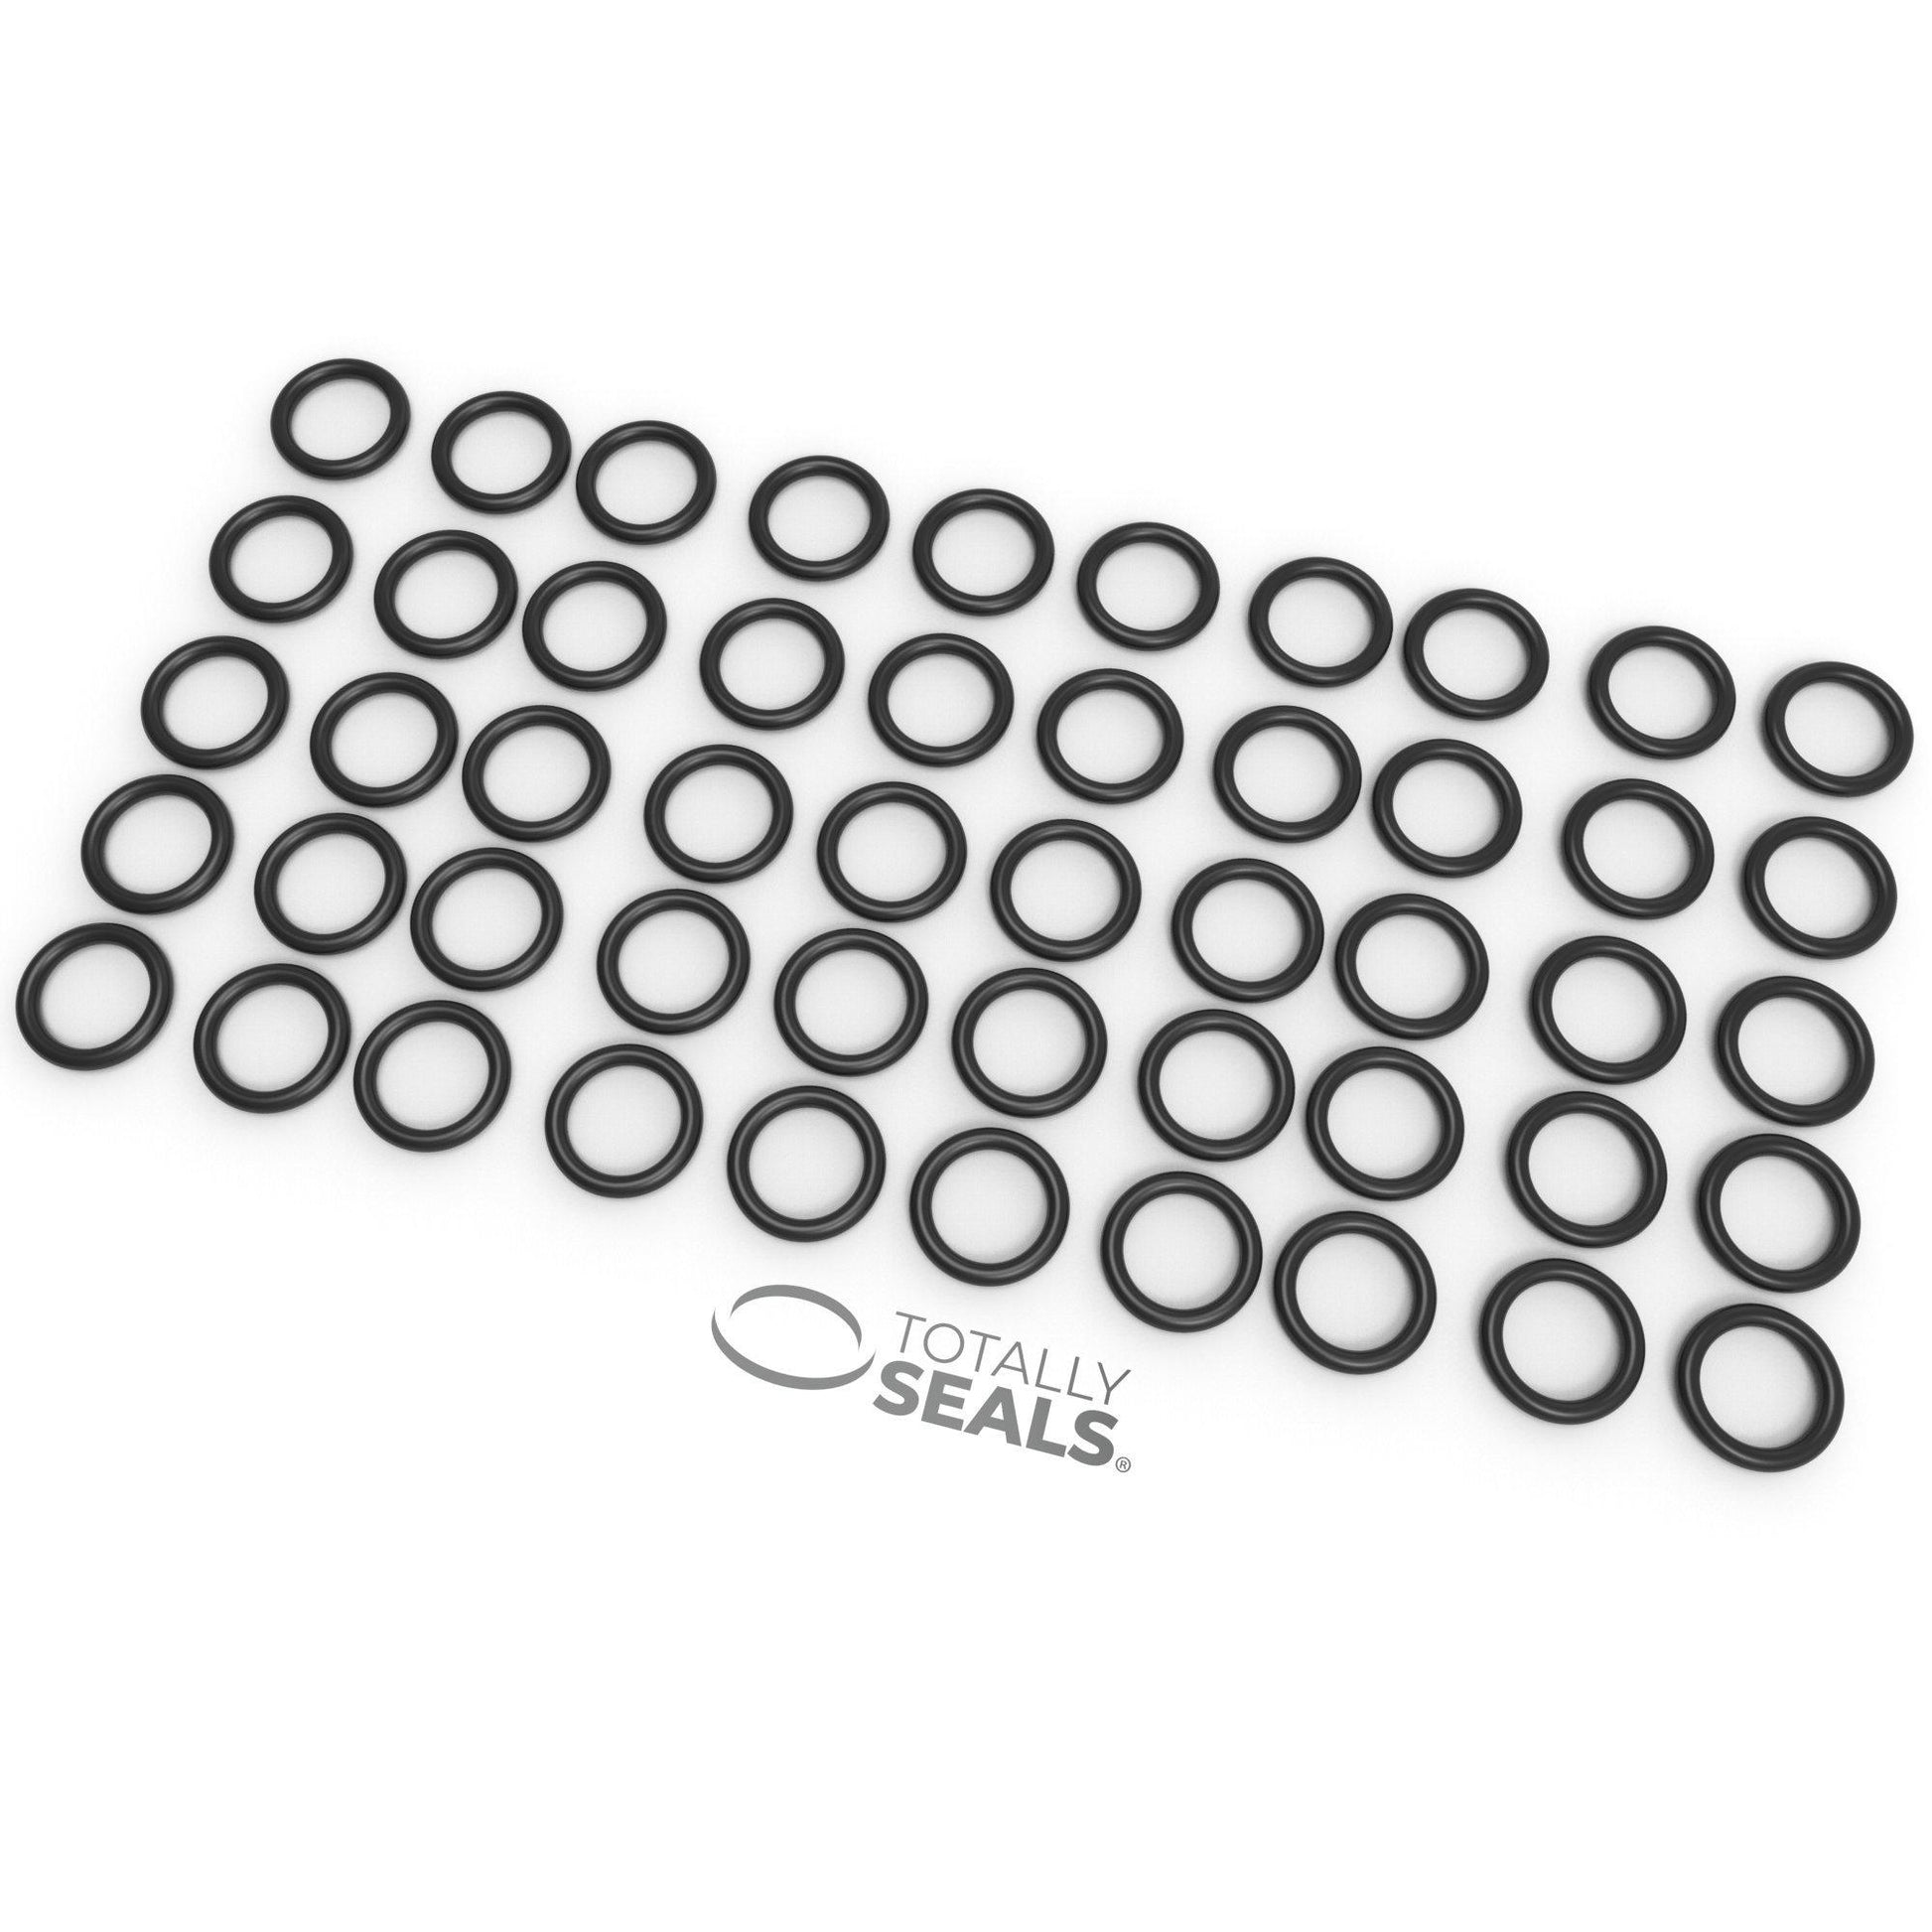 19mm x 1mm (21mm OD) Nitrile O-Rings - Totally Seals®